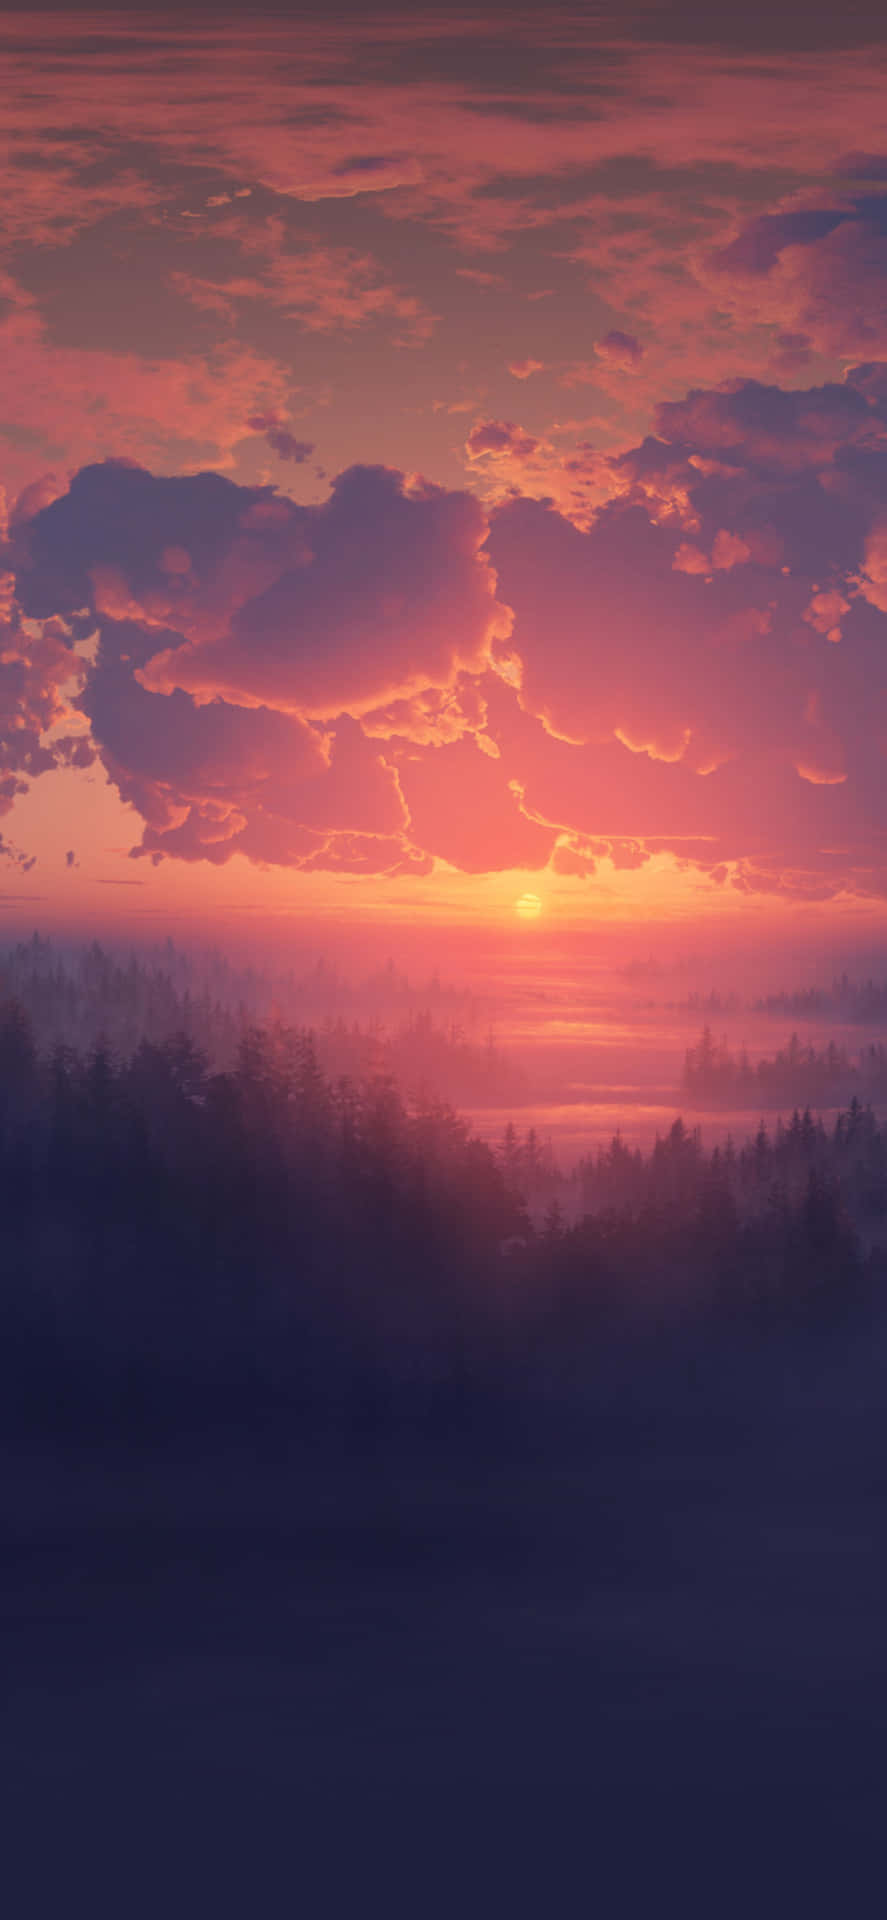 a sunset over a valley with trees and clouds Wallpaper